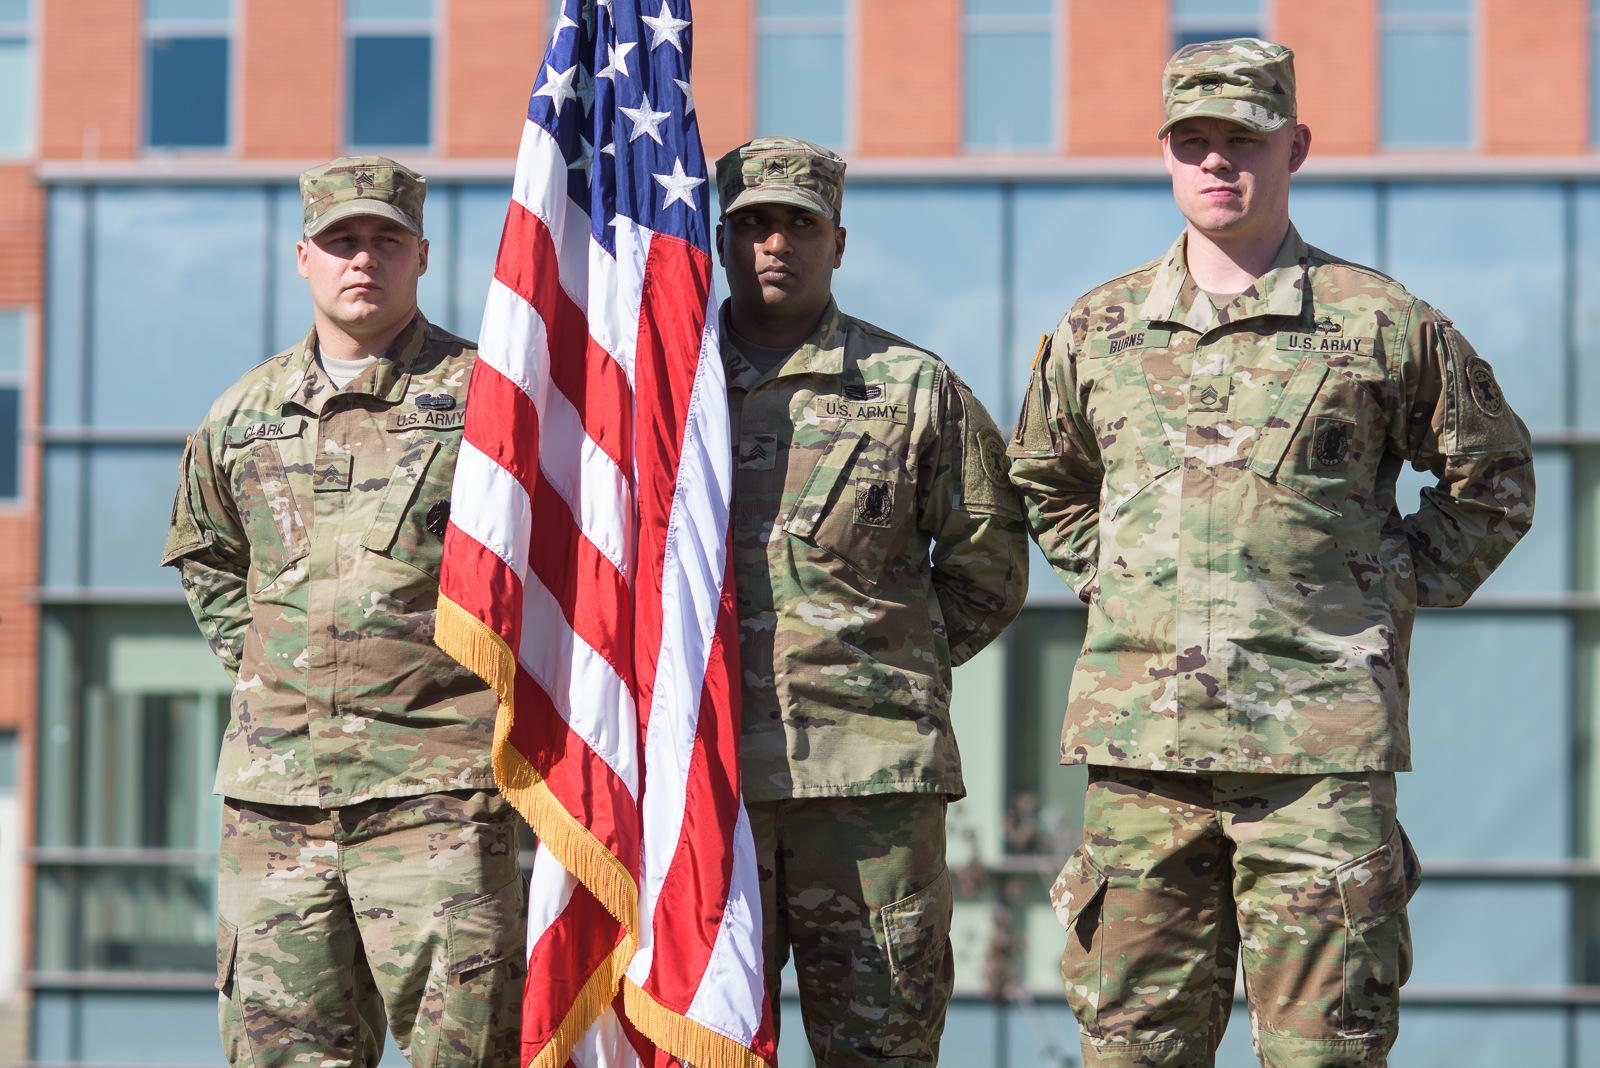 Soldiers standing with a flag